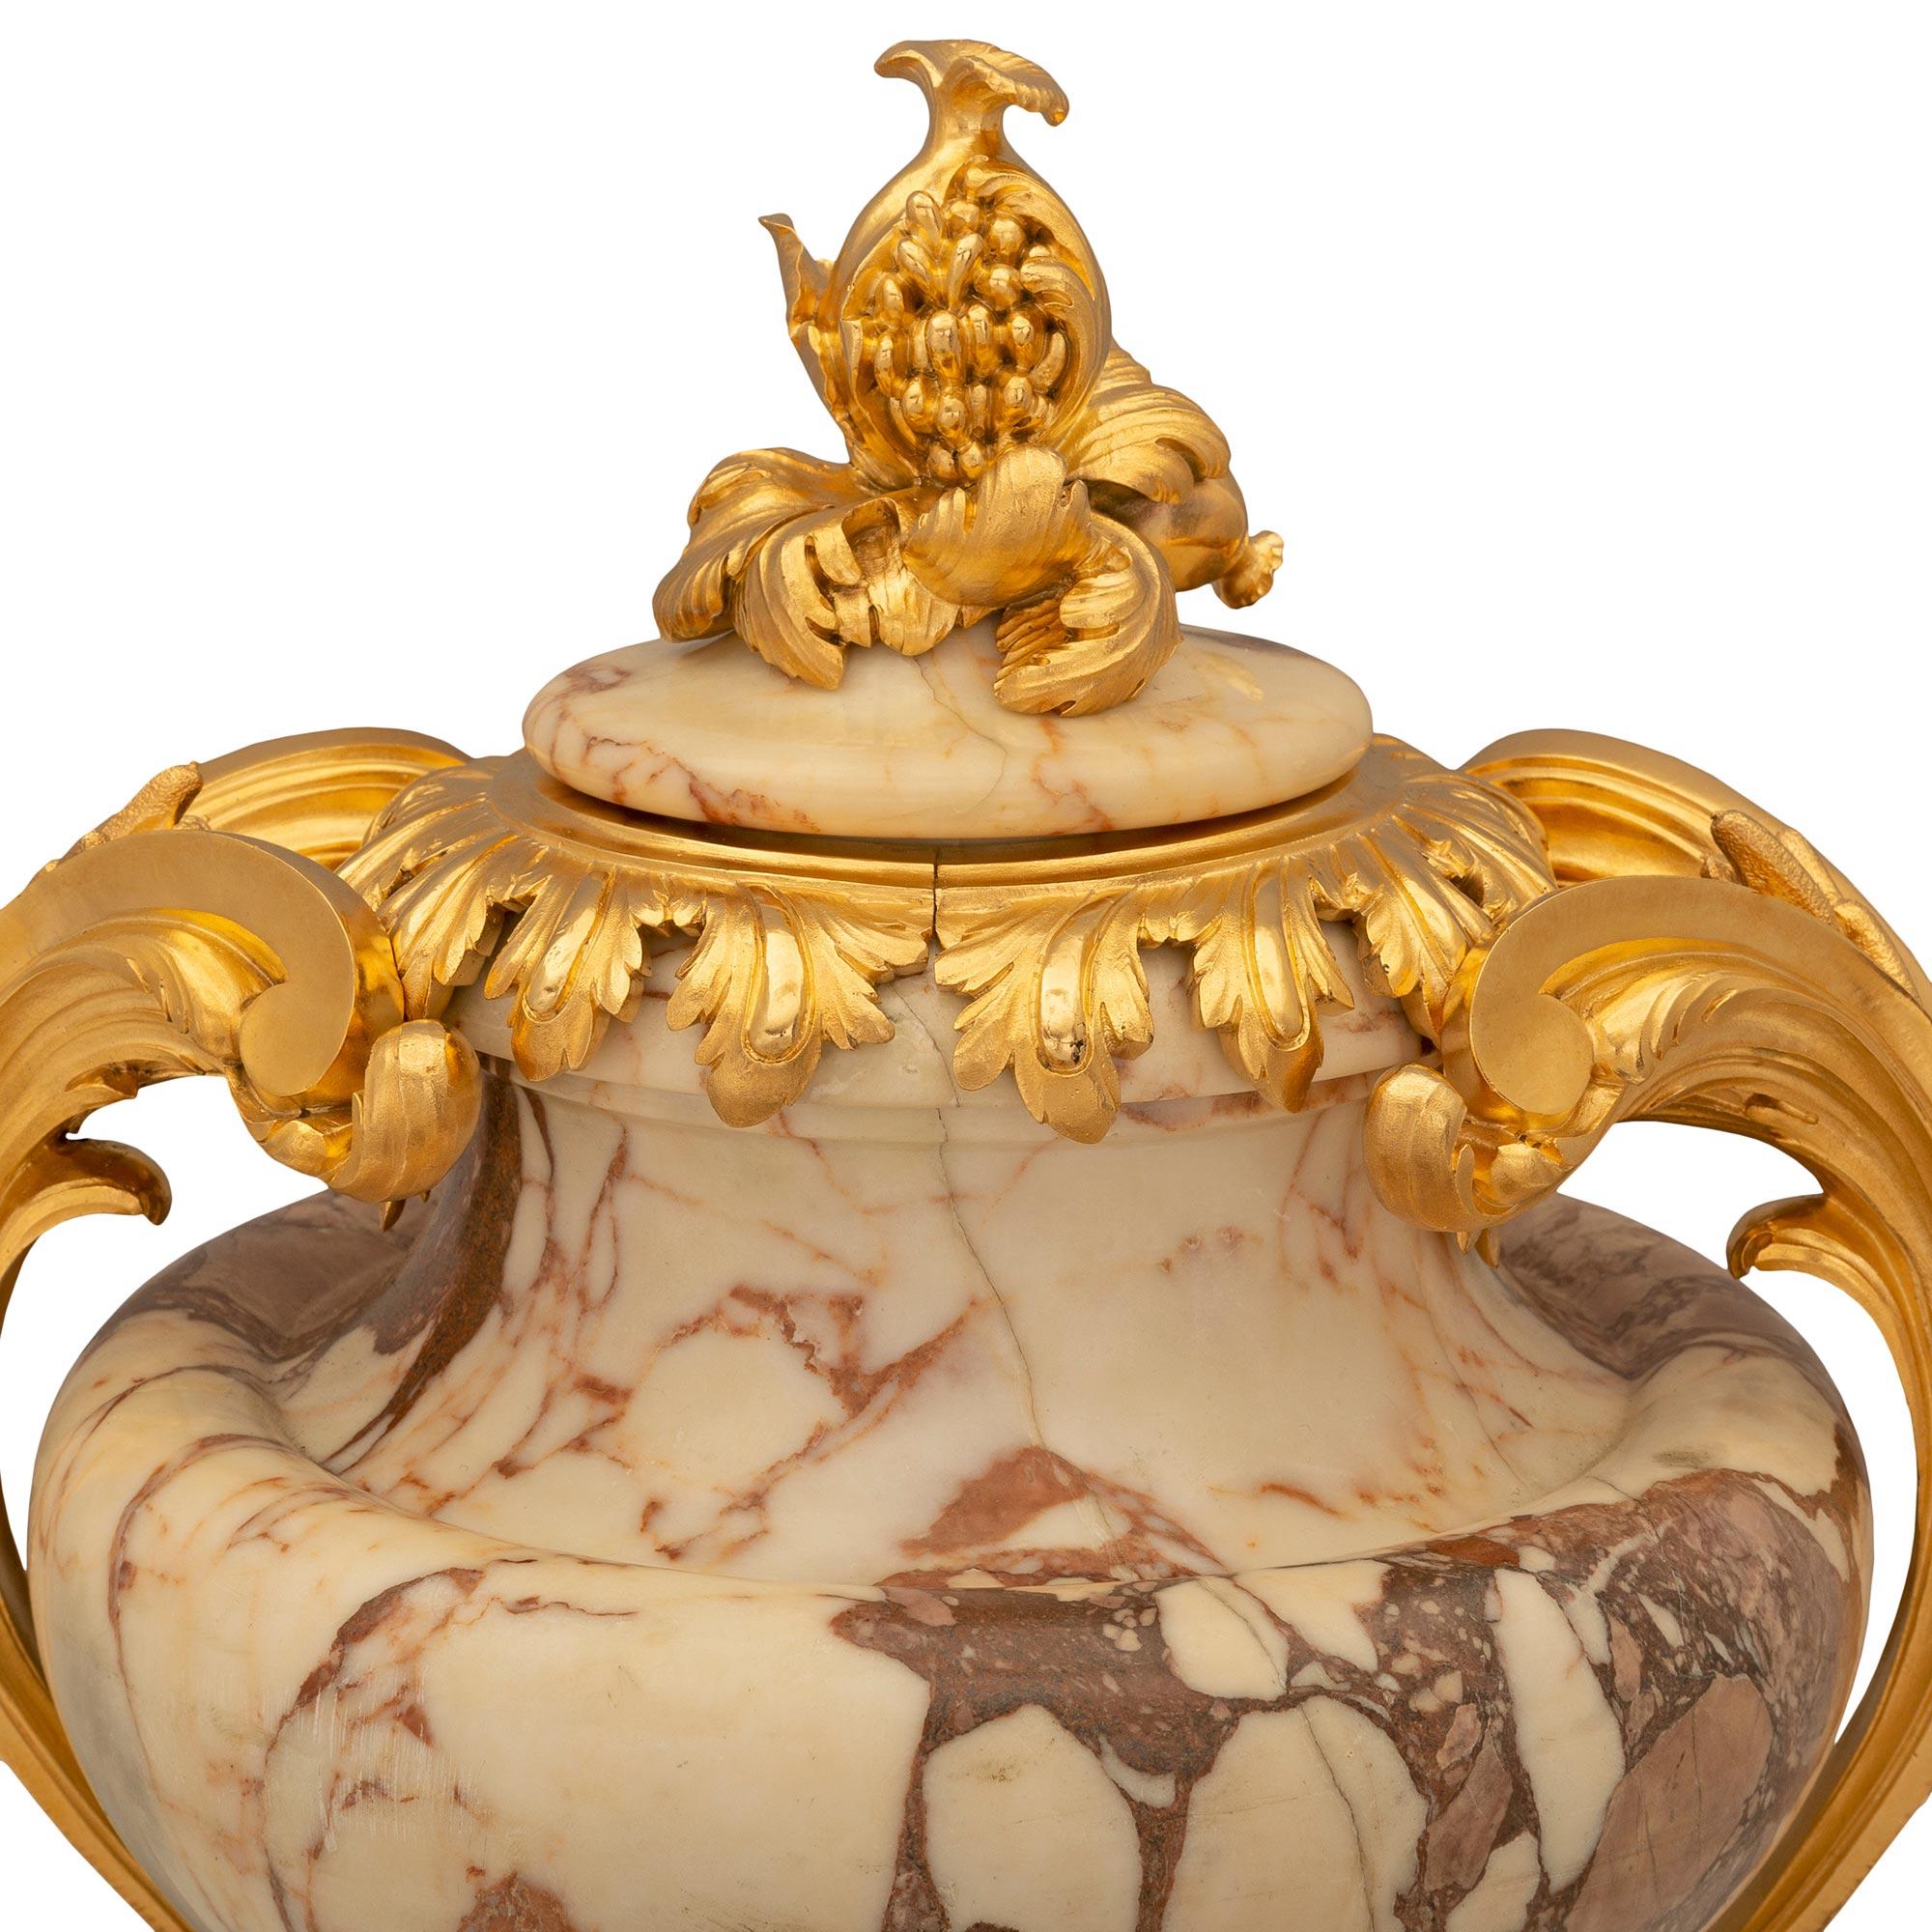 French 19th Century Louis XV St. Brèche Violette Marble and Ormolu Urn For Sale 1